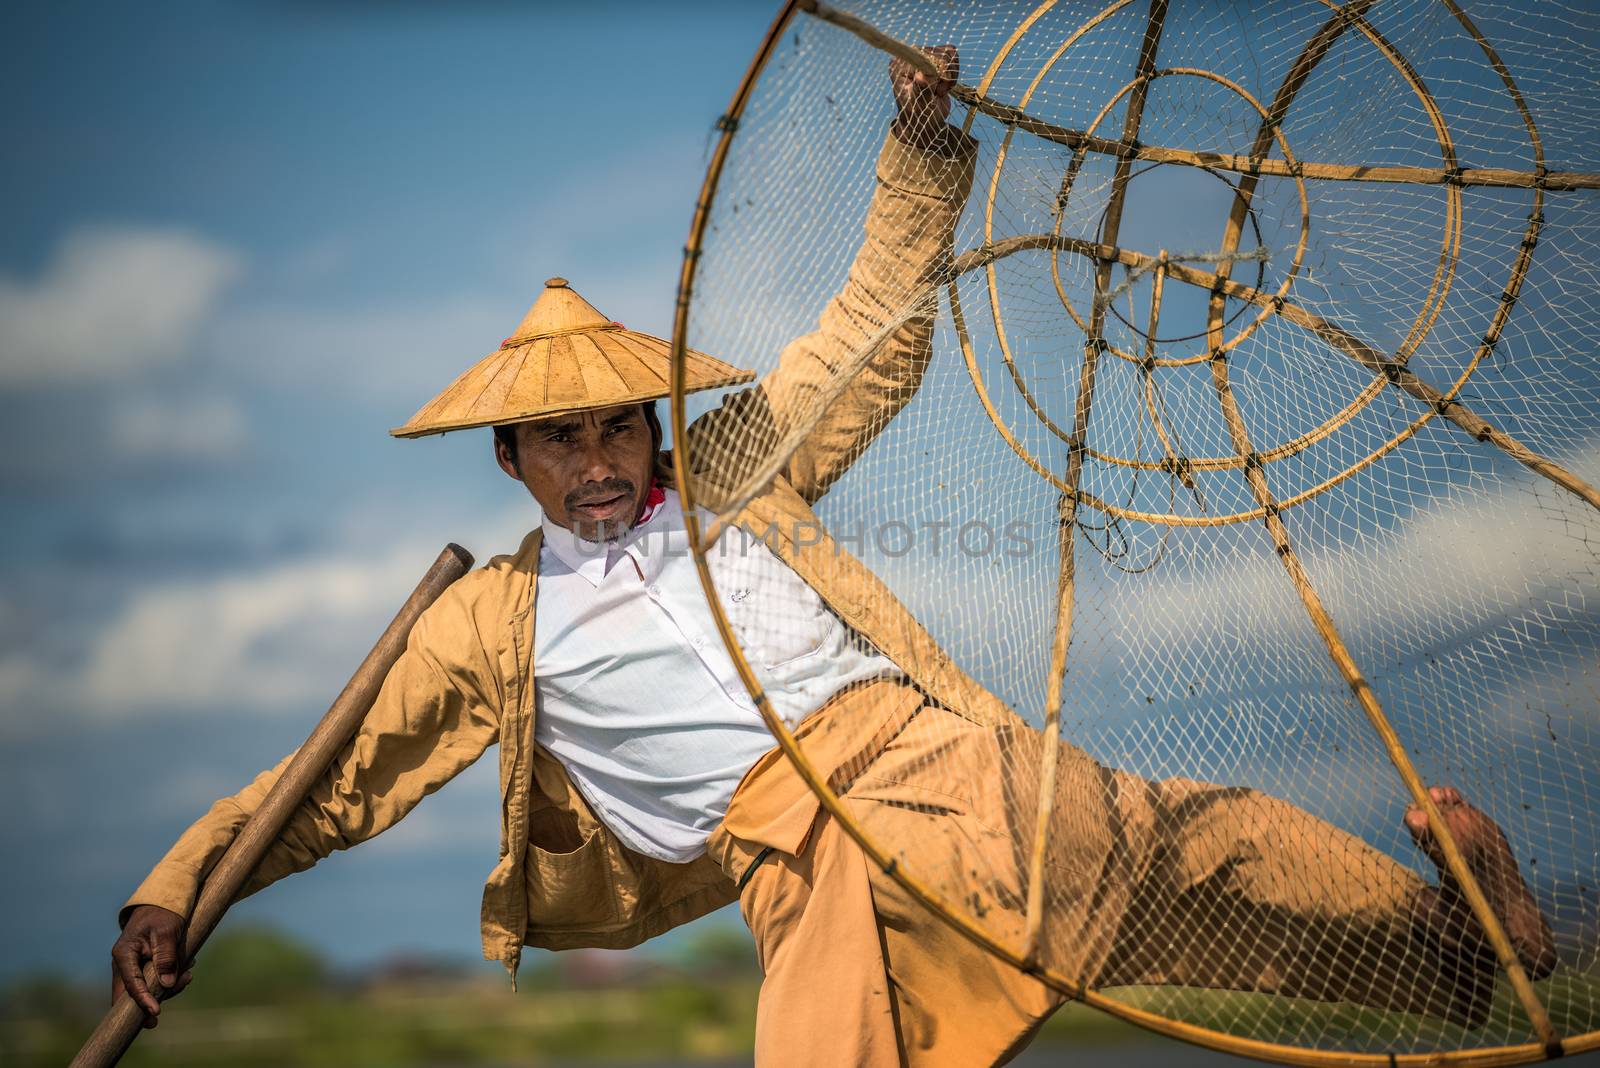 INLE LAKE, MYANMAR - JANUARY 26, 2016 : Close up of a burmese fisherman on a traditional bamboo boat using a handmade net